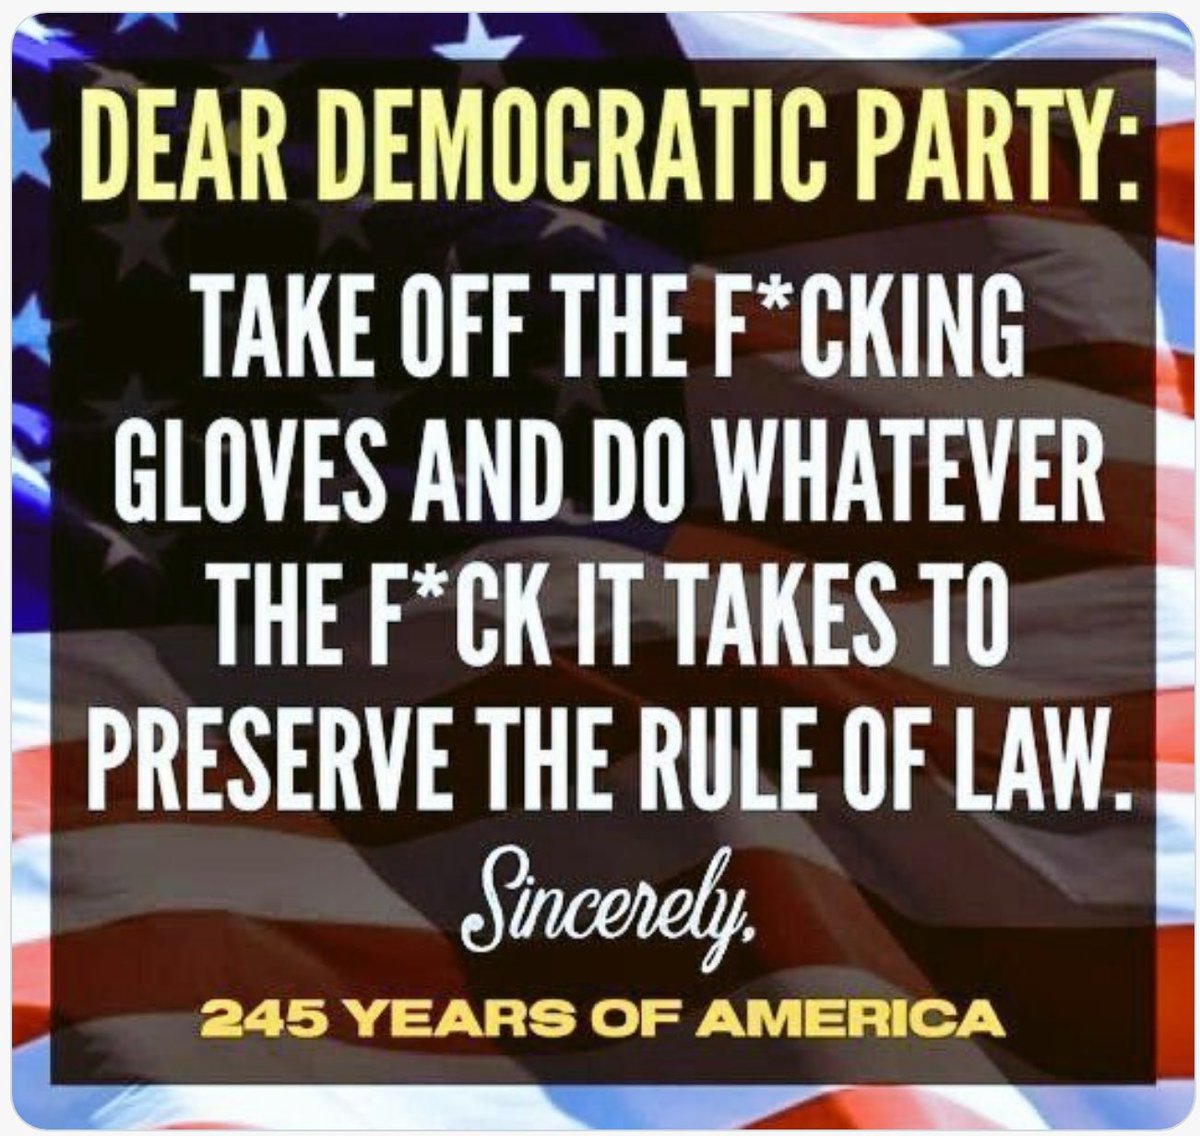 🌊🌊🌊🌊🌊 President Biden, The DNC & fellow Dems need to step up their level of urgency…BARE KNUCKLES👊🏻👊🏻 DO YOU AGREE? Like💙 Comment💯💯💯 Retweet♻️ Vet/Follow Each Other🤝🏻 OH…and HELL NO he isnt President Trump….He is POS Trump💩💯 #BlueWave2024 #StrongerTogether🌊💙